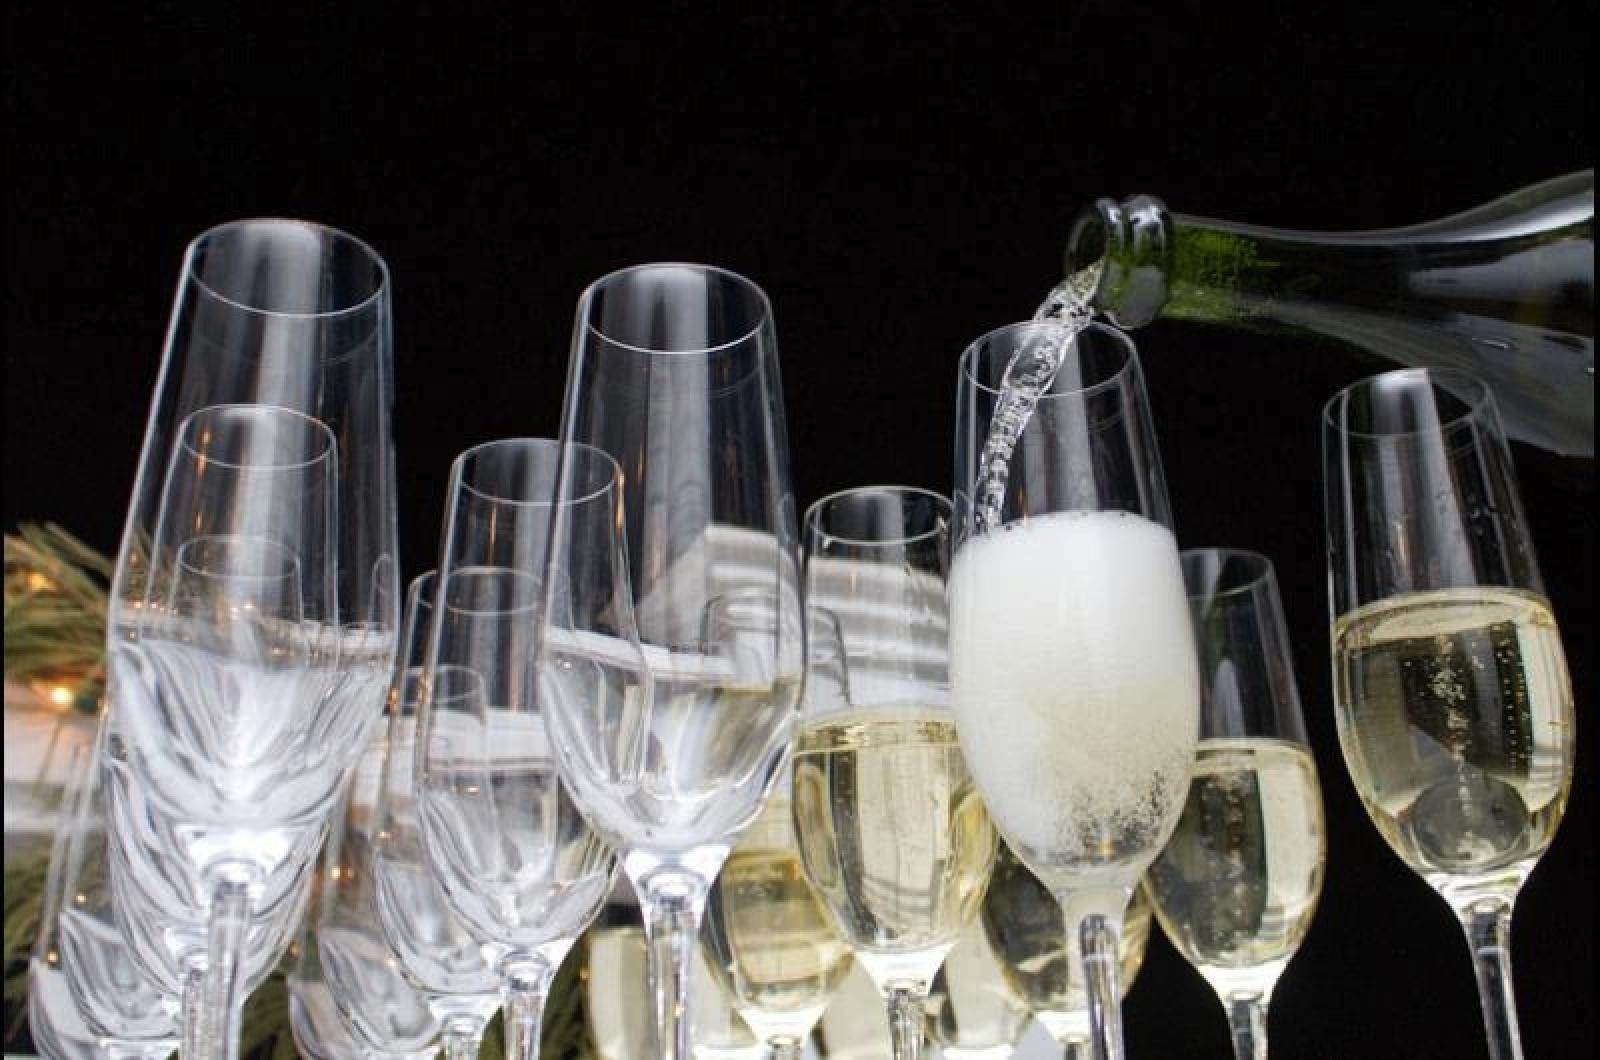 The Science of Champagne Glasses